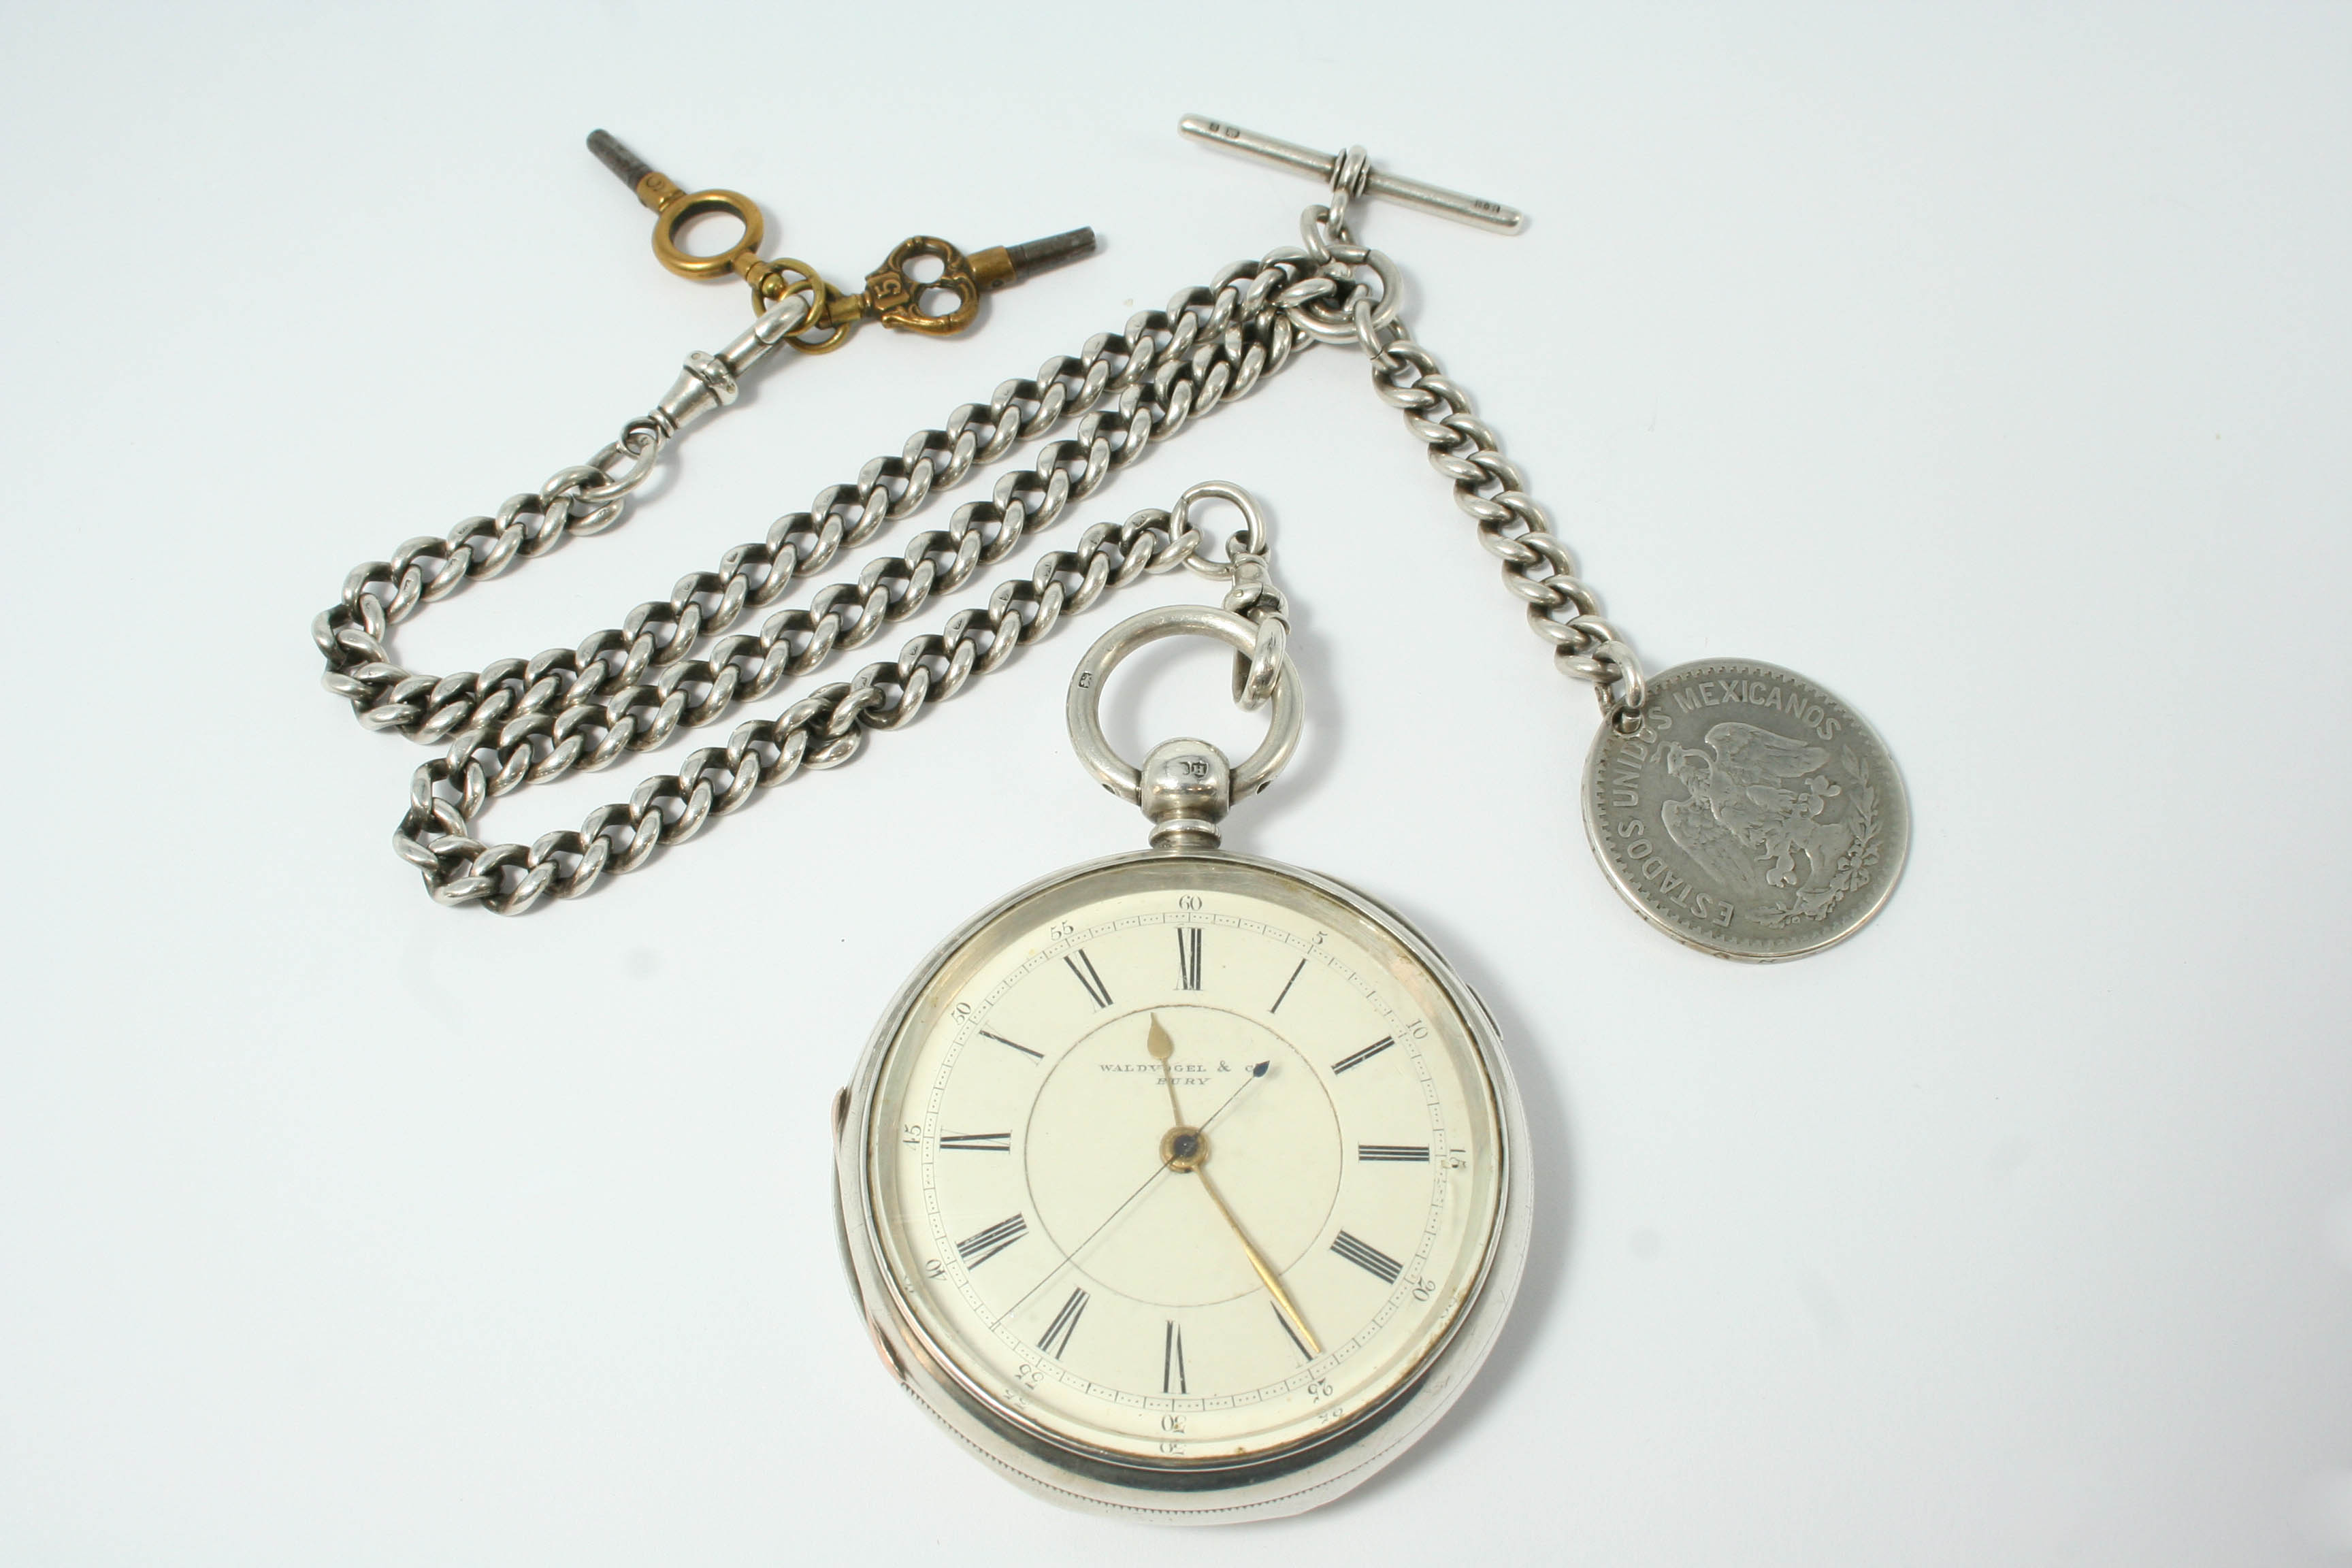 A SILVER OPEN FACED POCKET WATCH the white enamel dial signed Waldvogel & Bury and with Roman